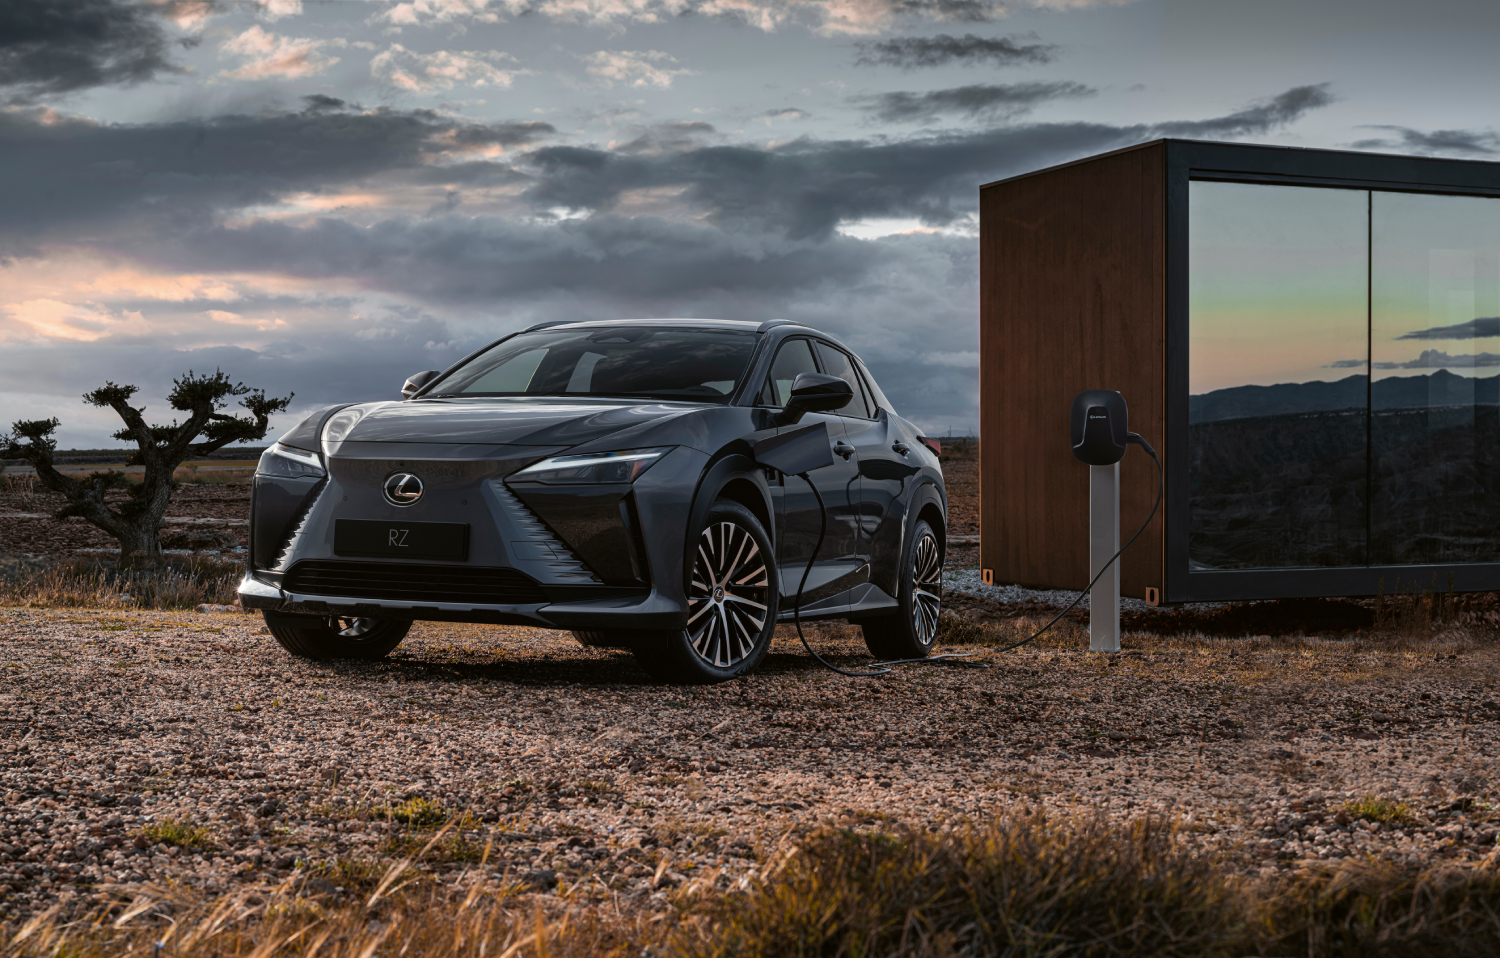 2023 electric SUVs and crossovers like the 2023 Lexus RZ 450e